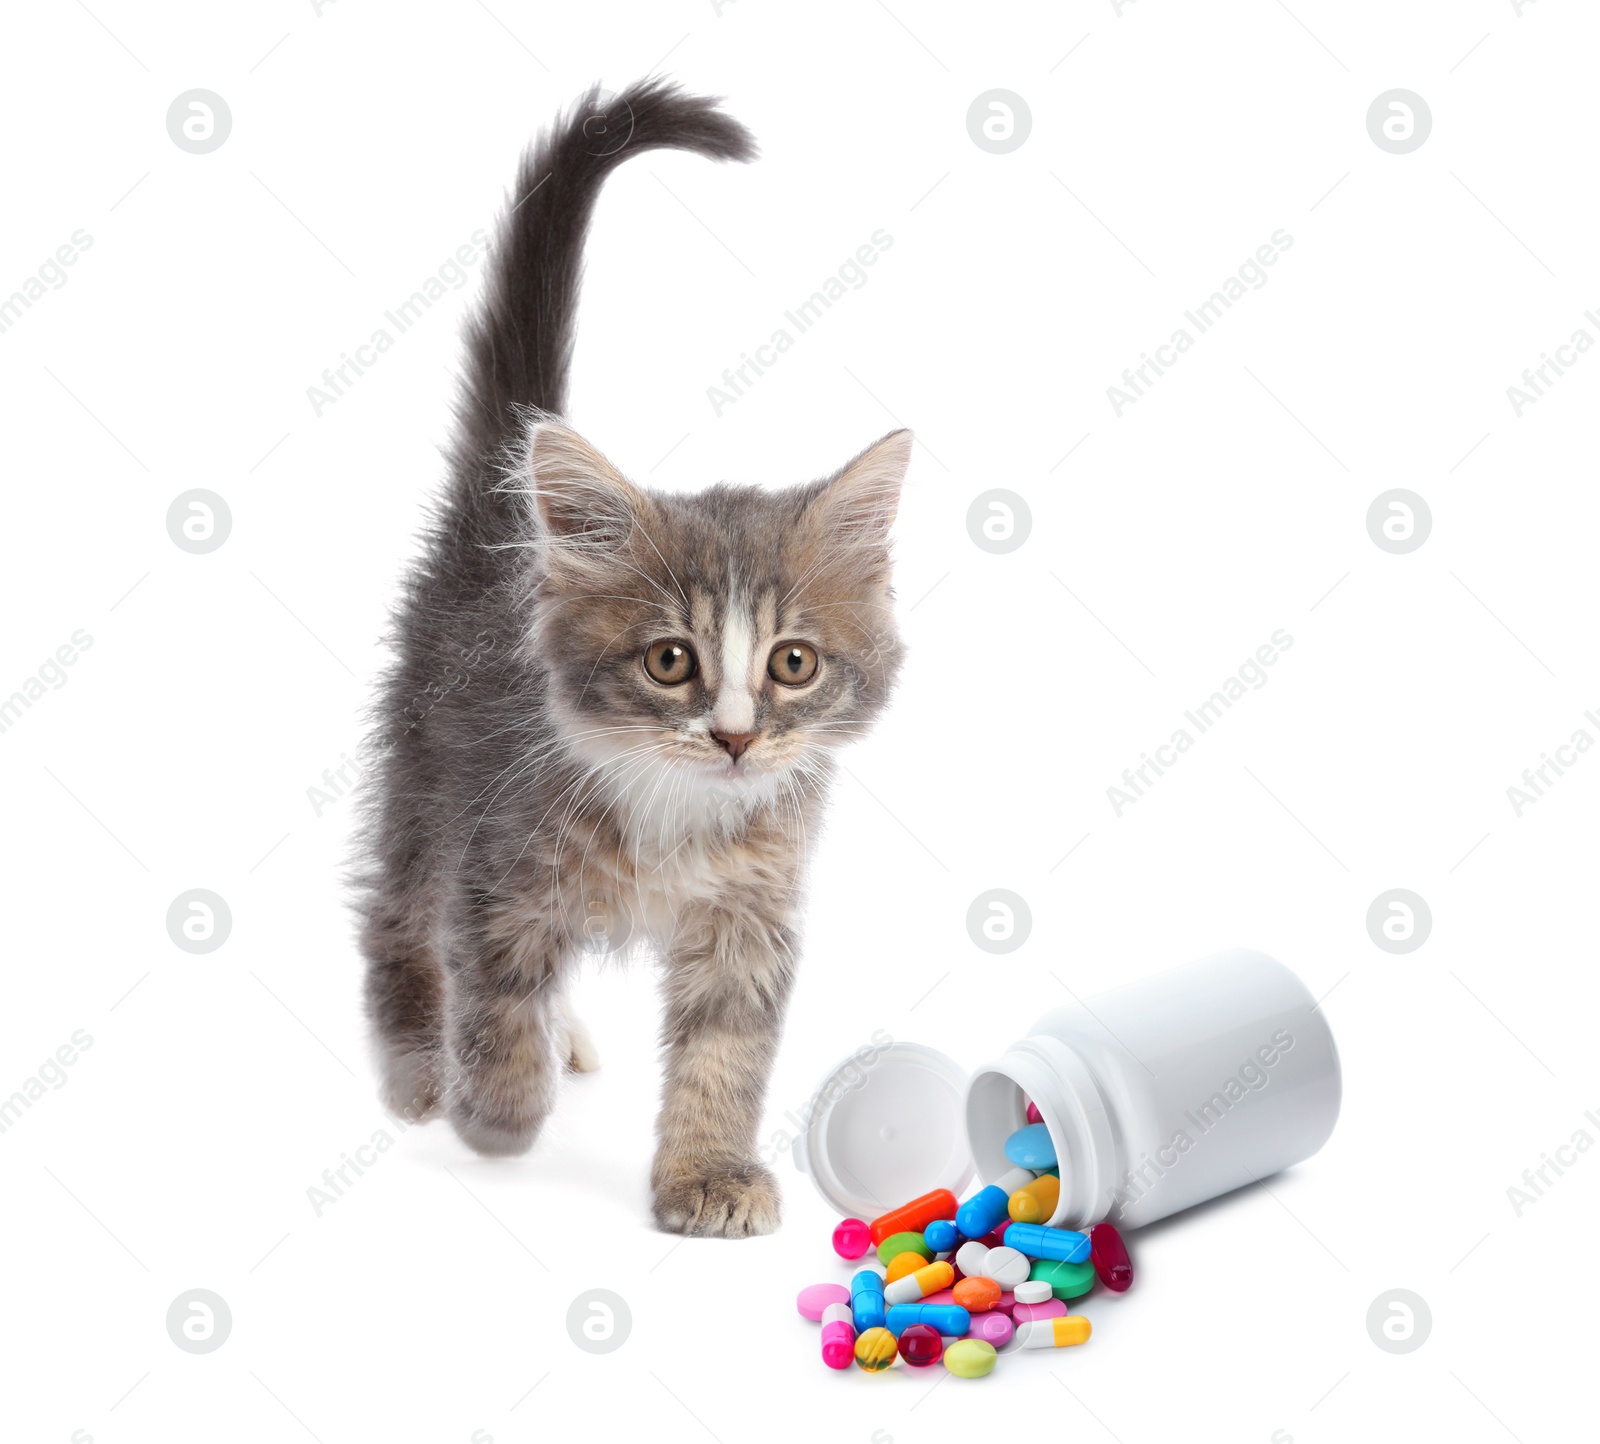 Image of Vitamins for pets. Cute kitten and bottle with different pills on white background